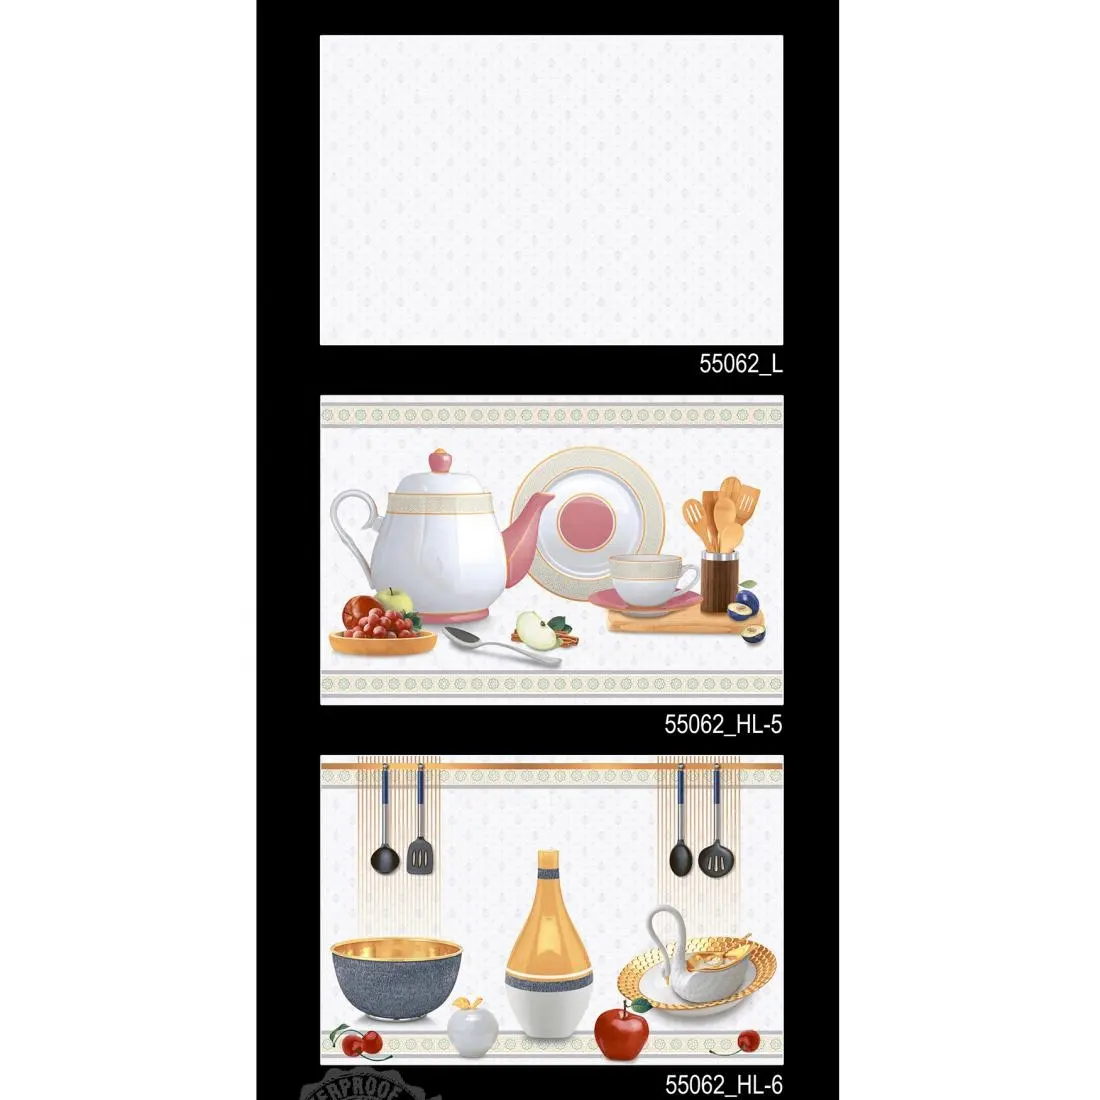 "Vistaar Brand Tea Pot Pictures: Glossy Ceramic Digital Glazed Wall Tiles for Kitchen Use Sizes: 30x45 12x18 12x24 30x60 300x450